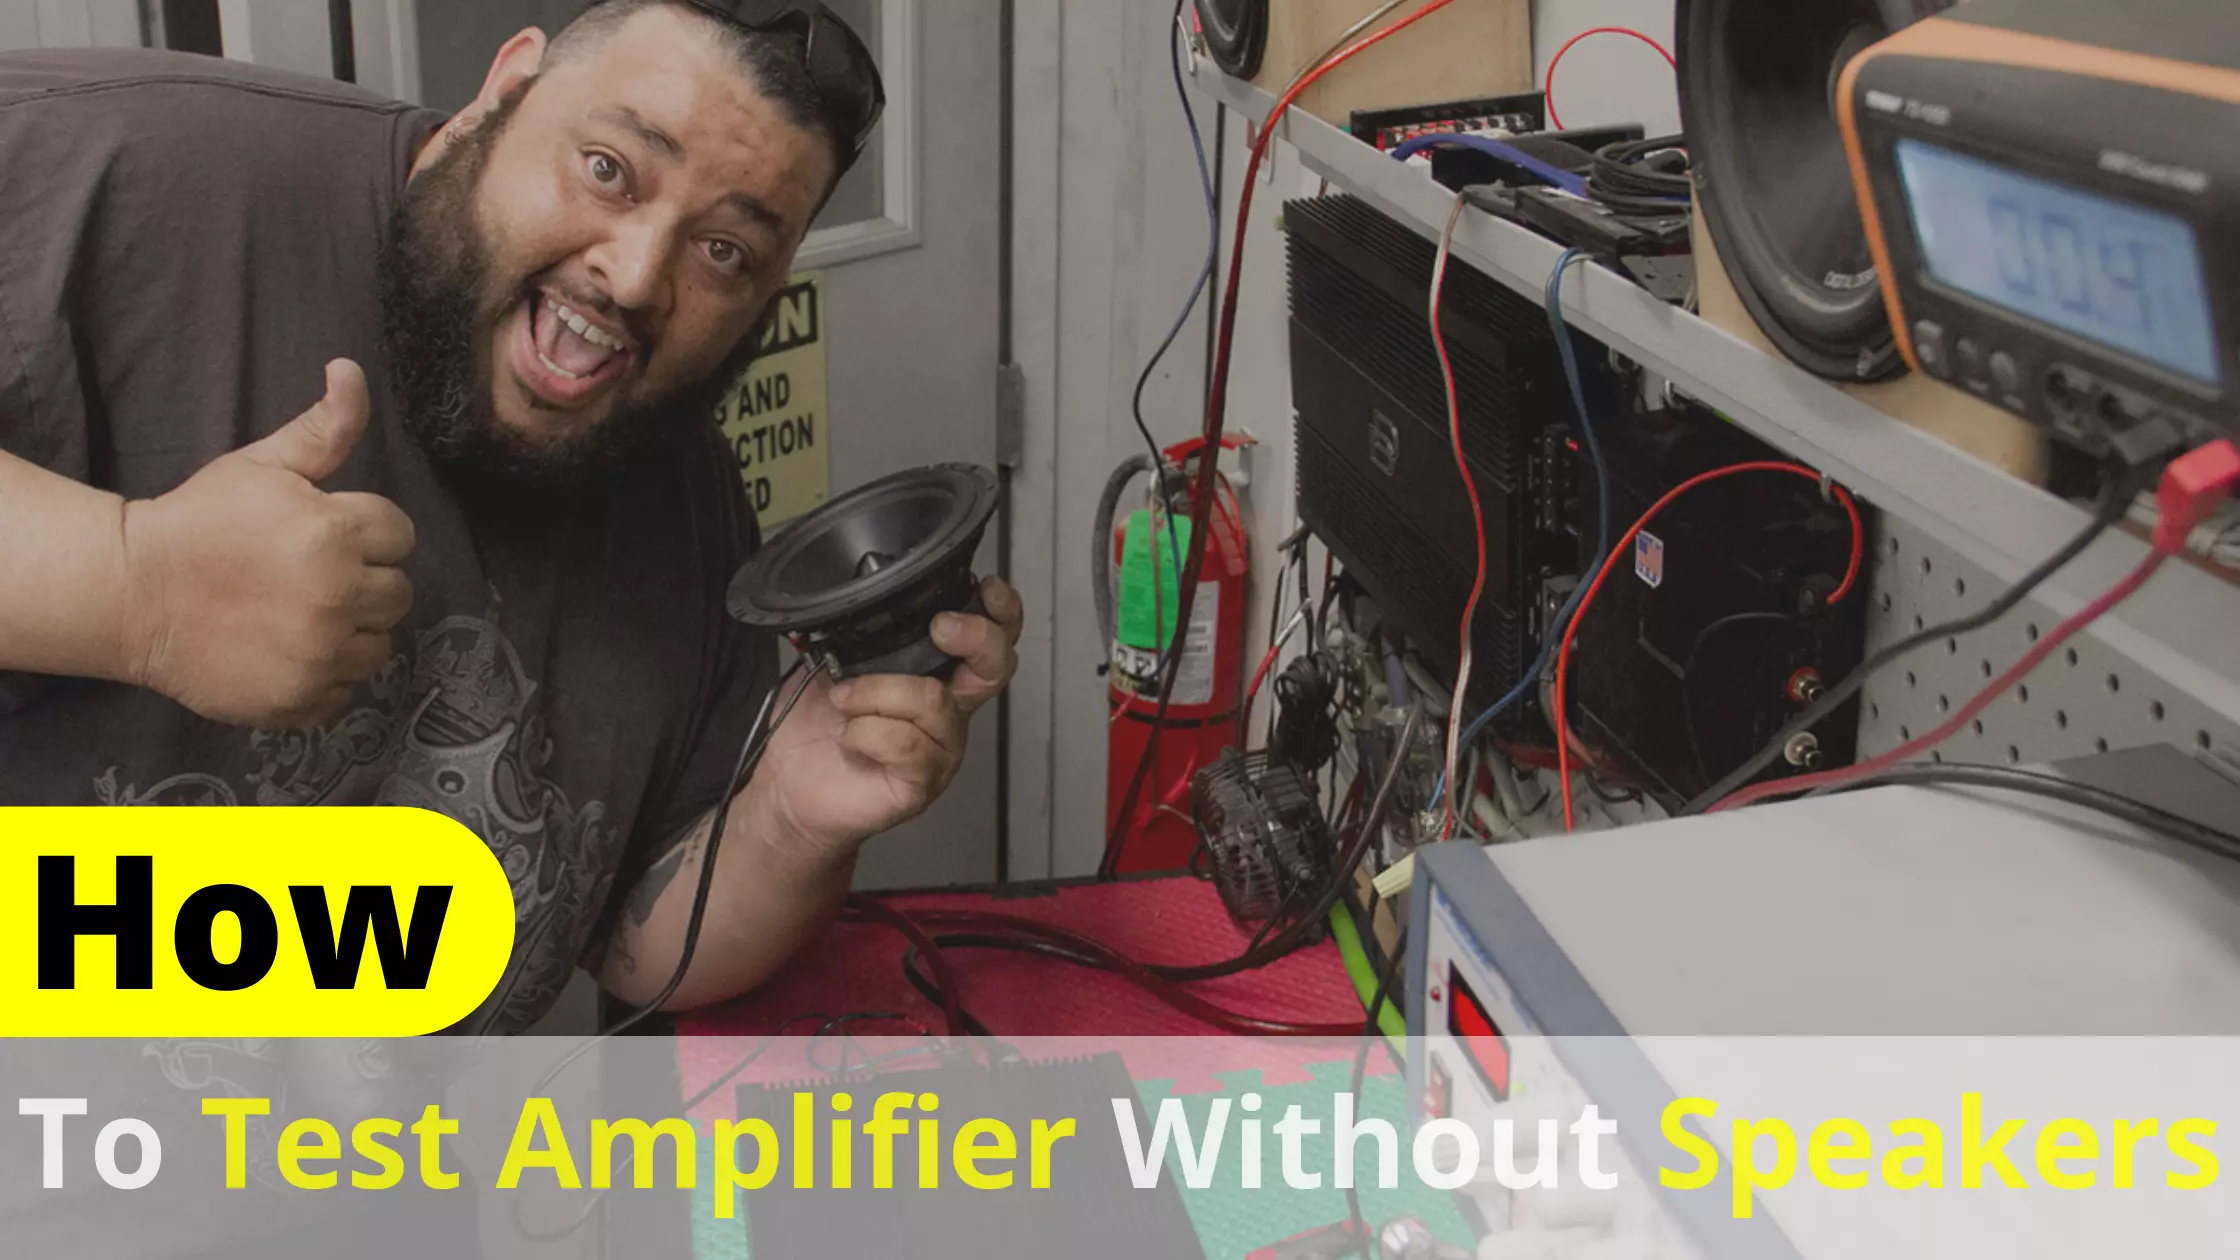 How To Test Amplifier Without Speakers? Guide